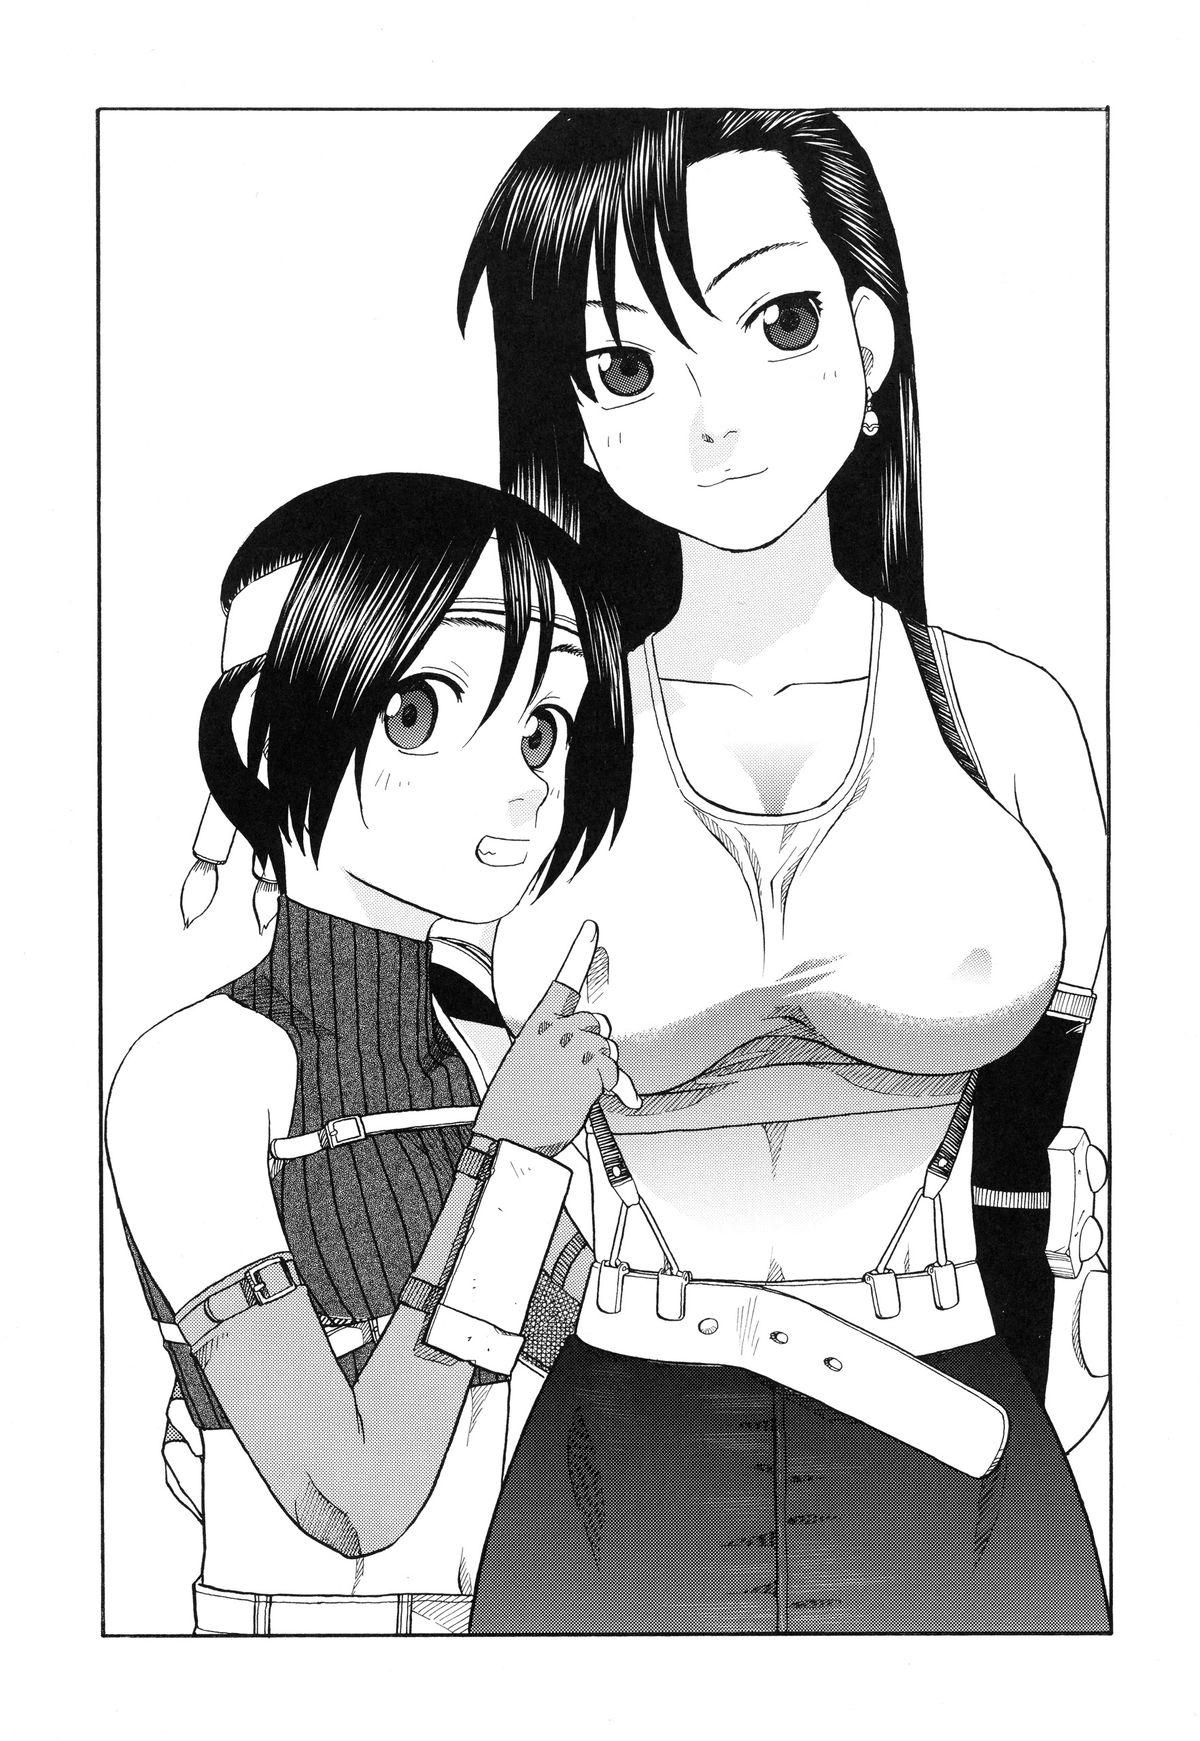 Anal Tifa to Yuffie to Yojouhan - Final fantasy vii Public - Page 3